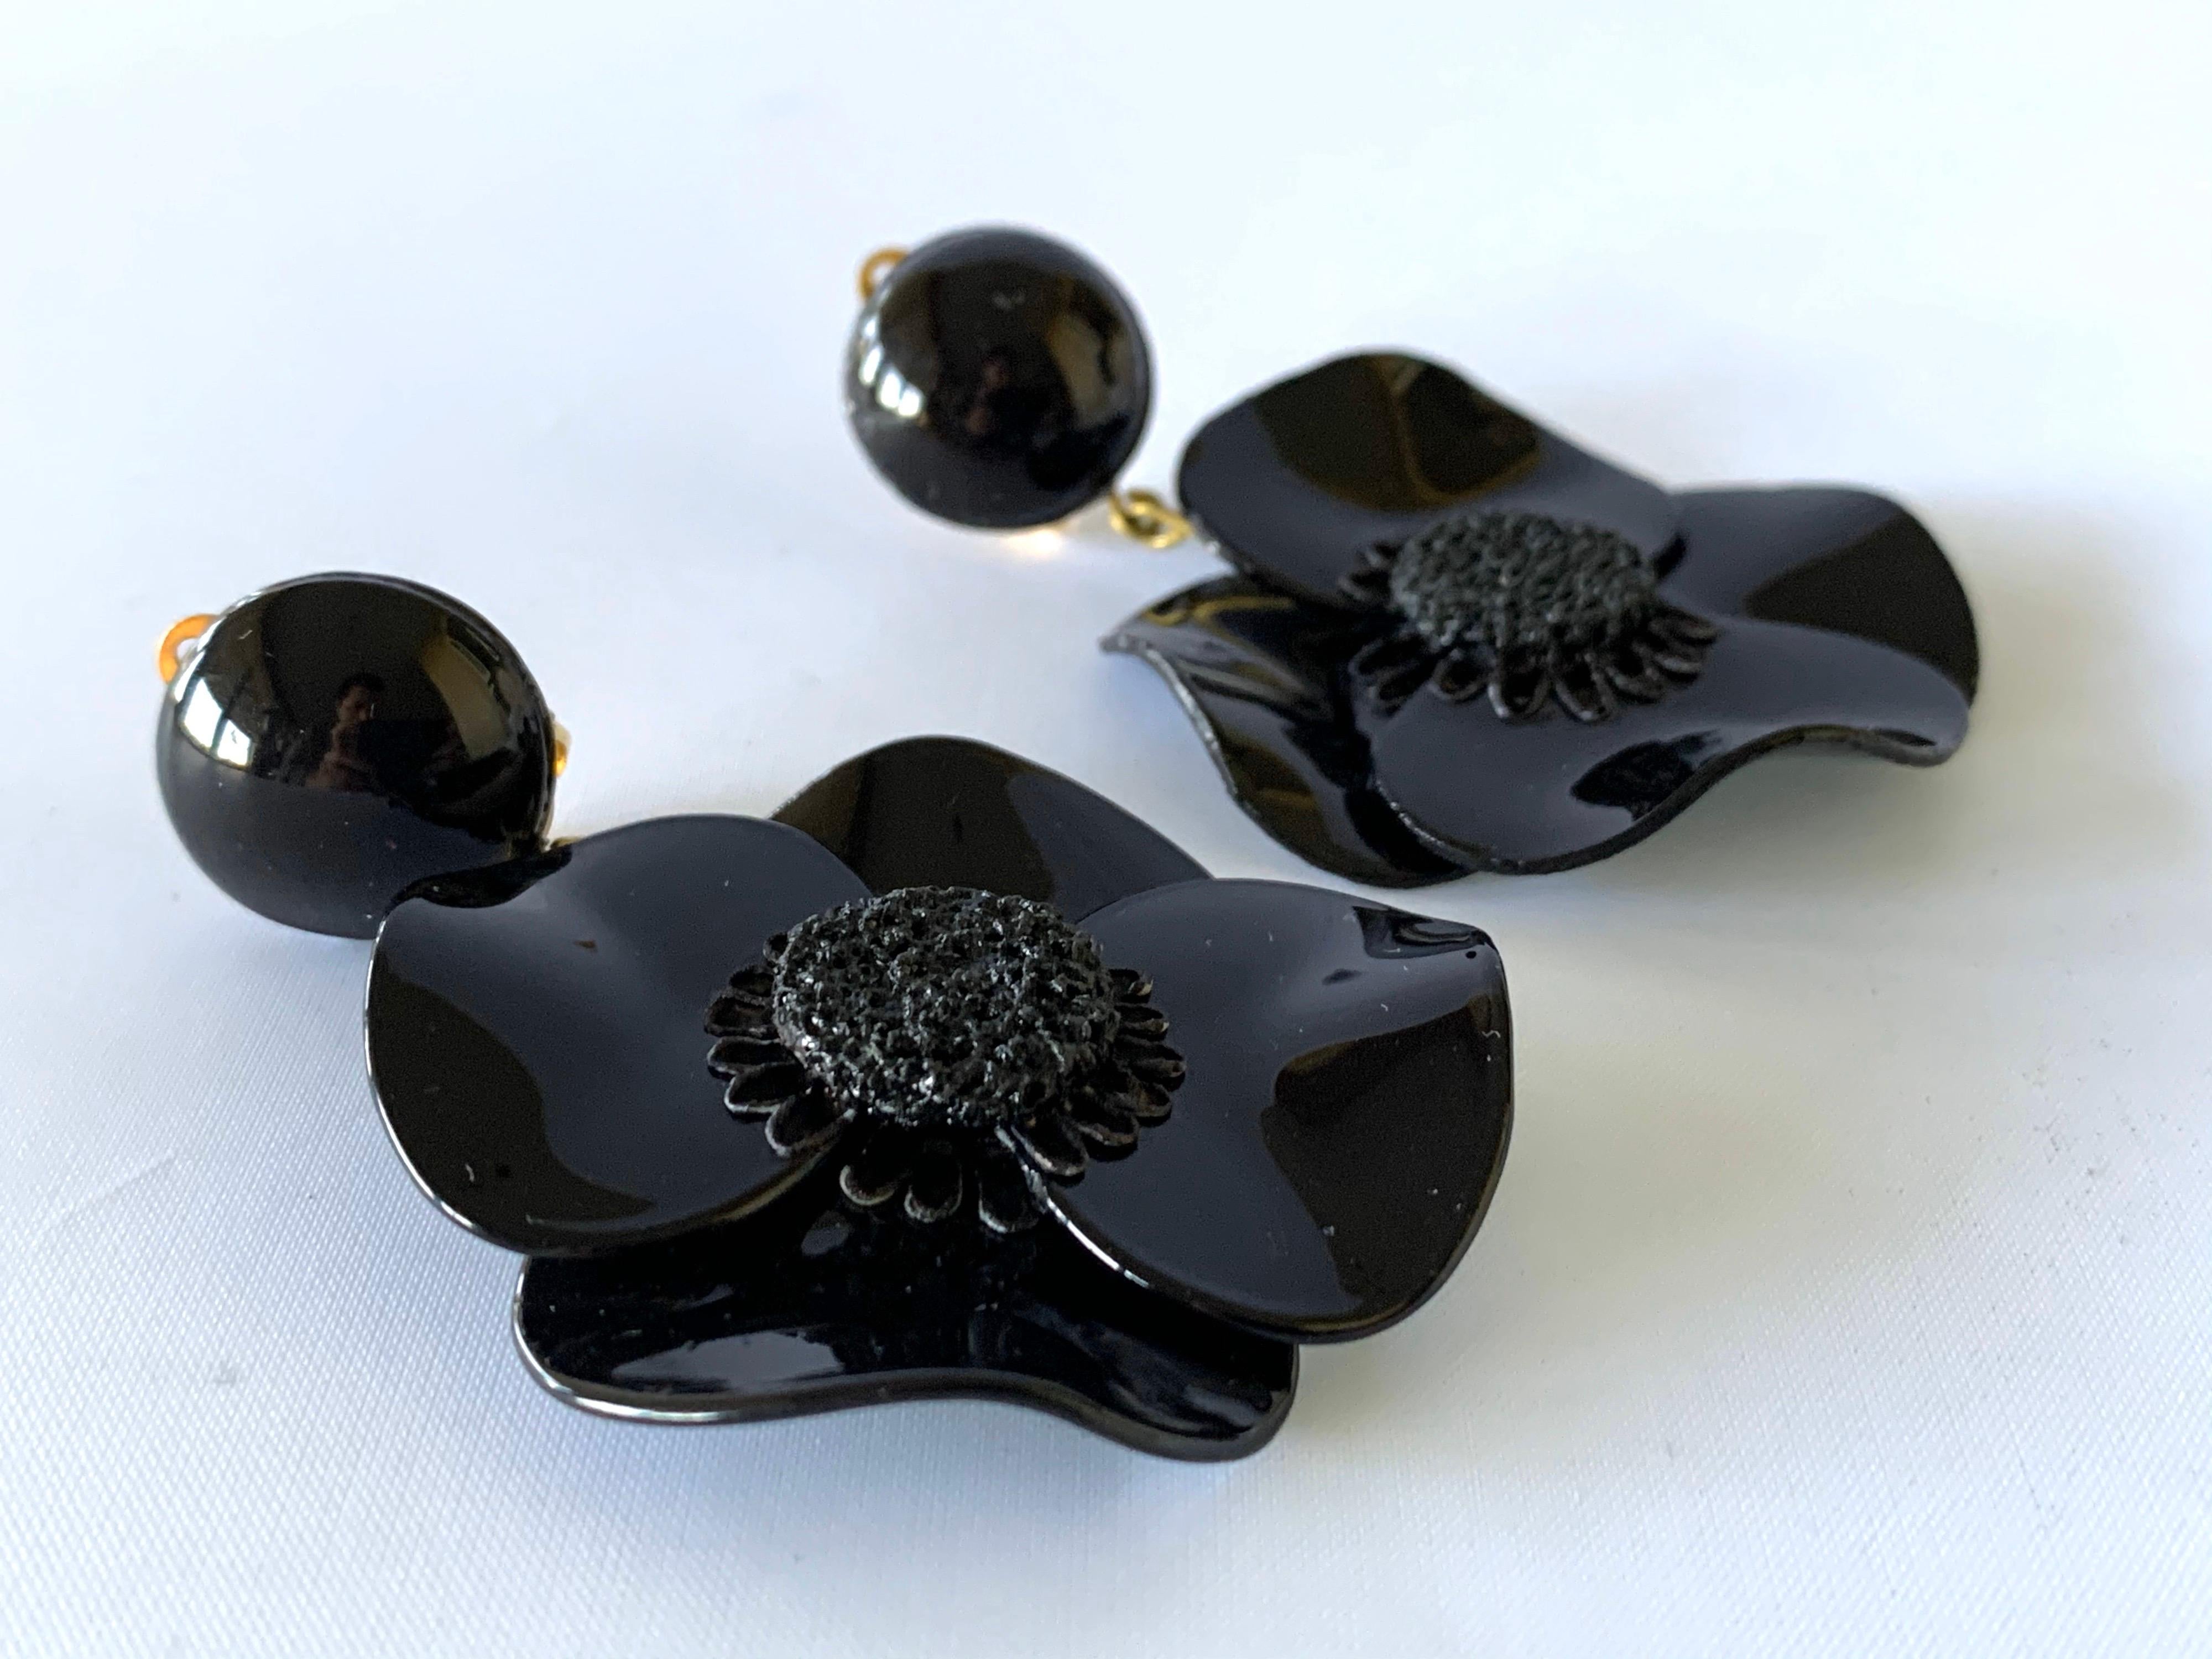 Light and easy to wear, these handmade artisanal contemporary clip-on earrings were made in Paris by Cilea. The lightweight clip-on earrings feature a single architectural enameline (enamel and resin composite) black poppy flower. The poppies are